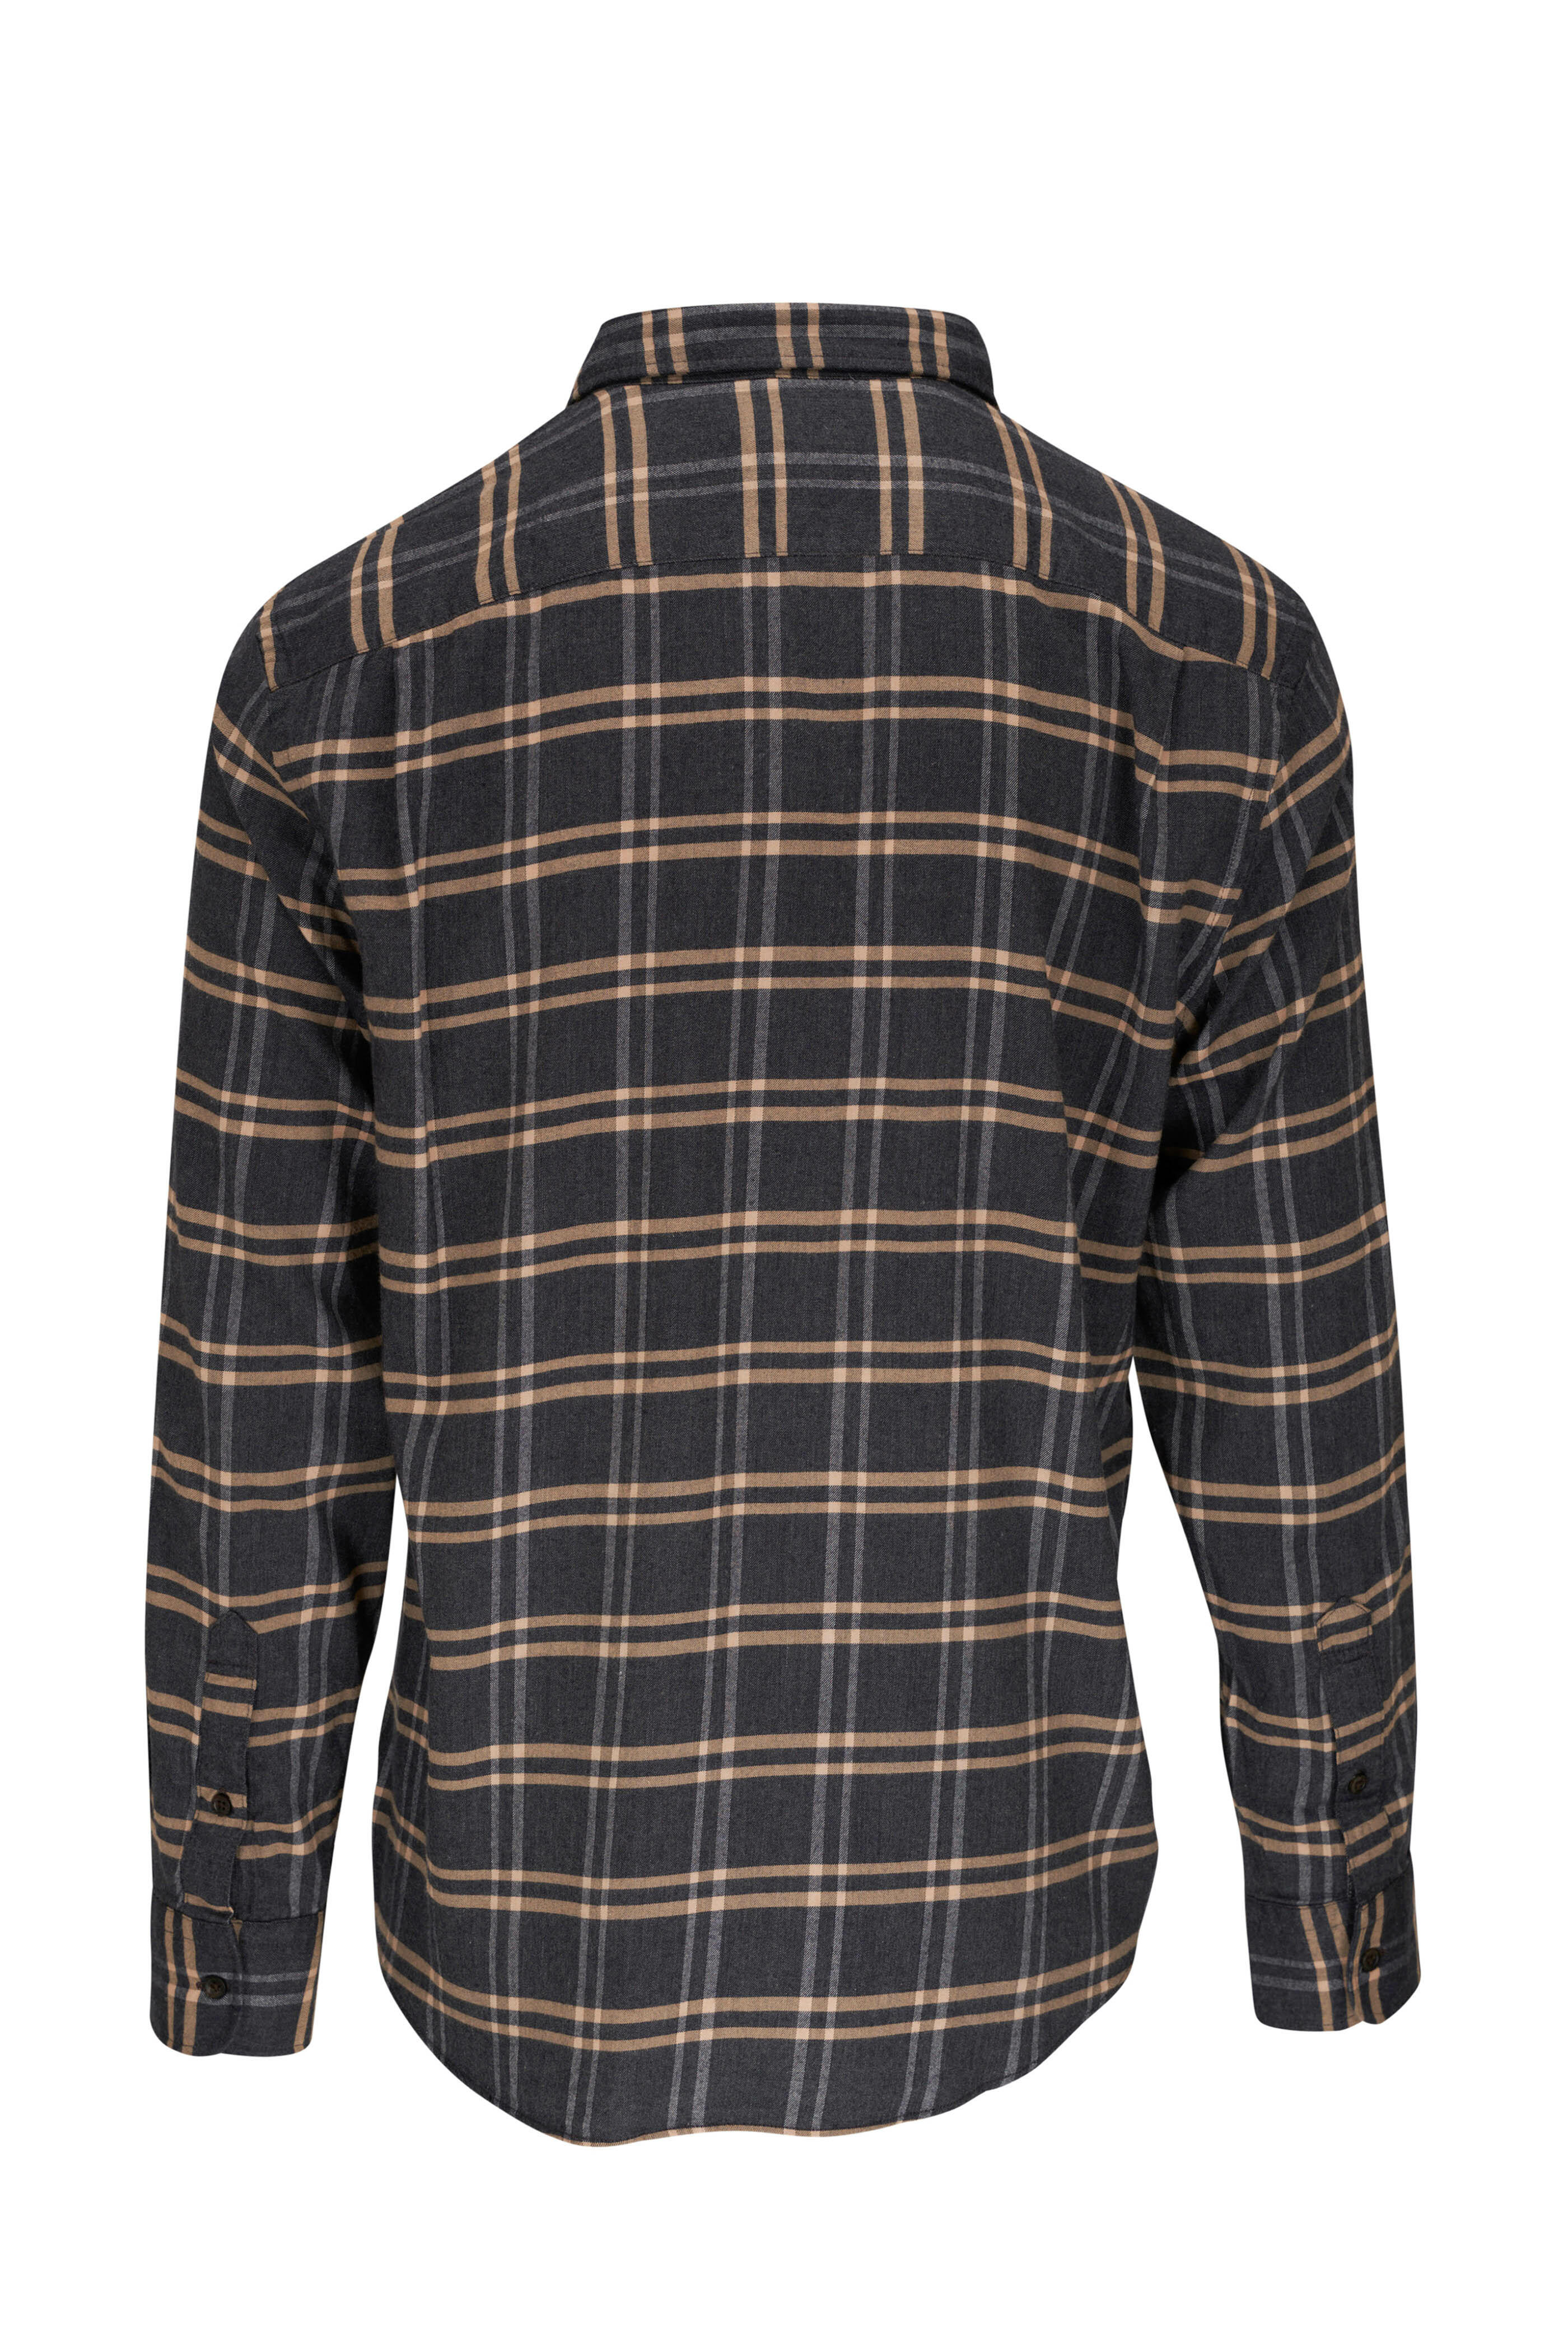 Faherty Brand - The All Time Granite Canyon Plaid Sport Shirt